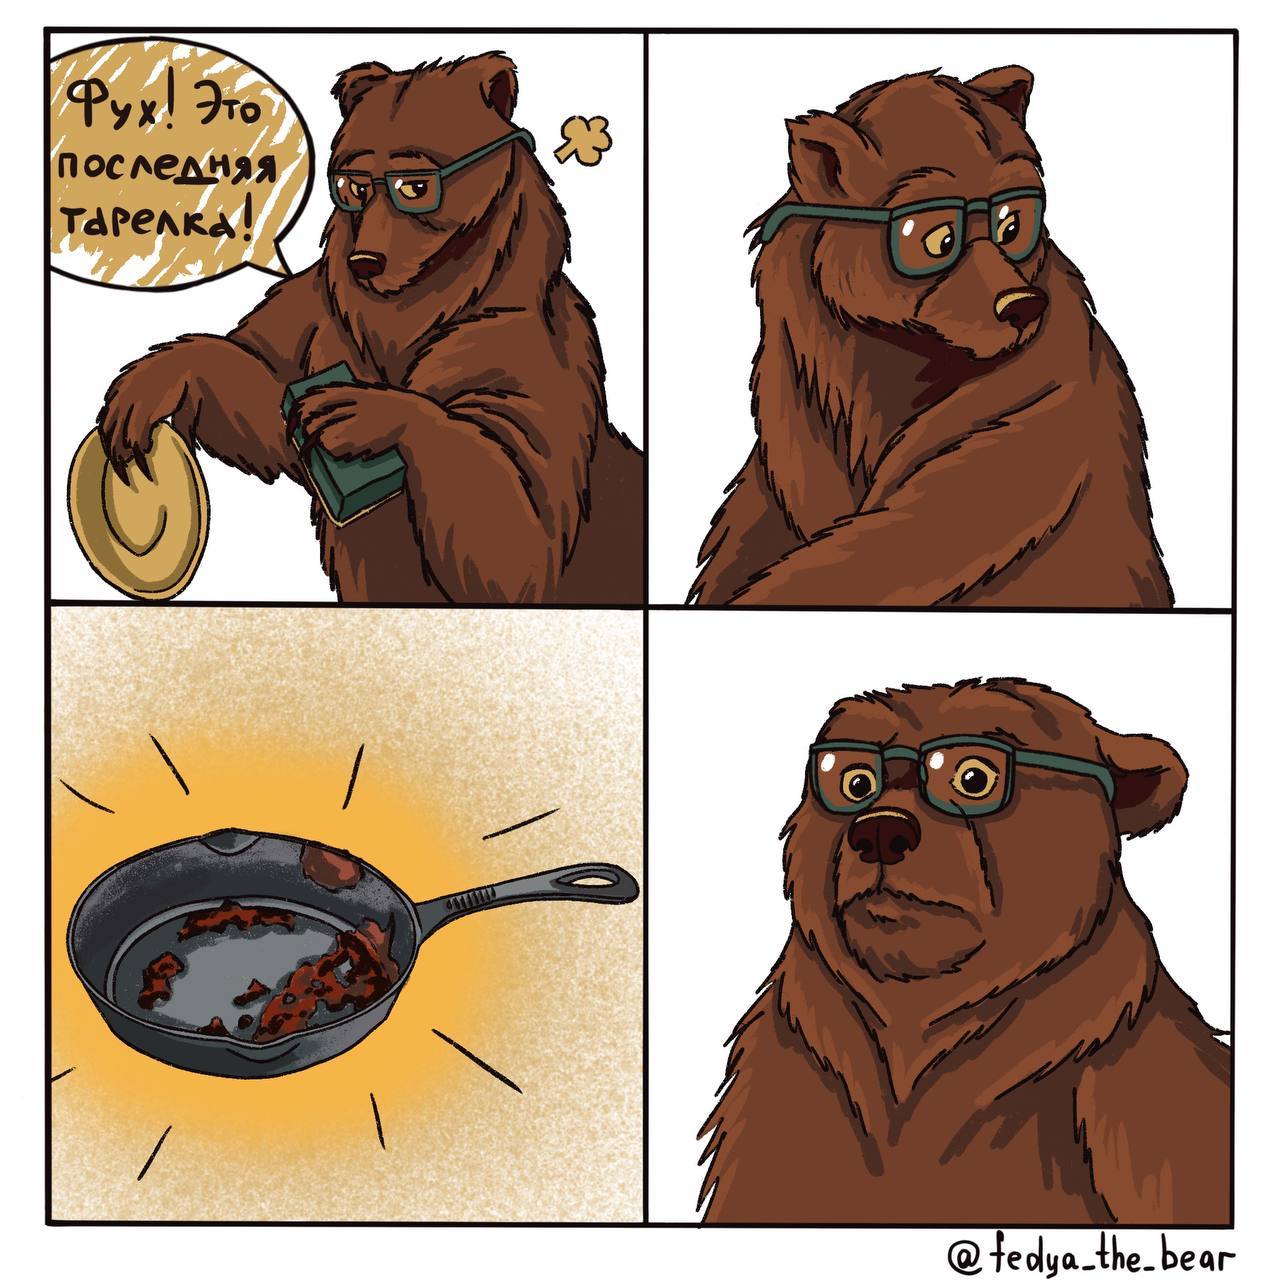 Frying pan - My, Comics, Author's comic, Humor, Dishwashing, Disappointment, Meanness